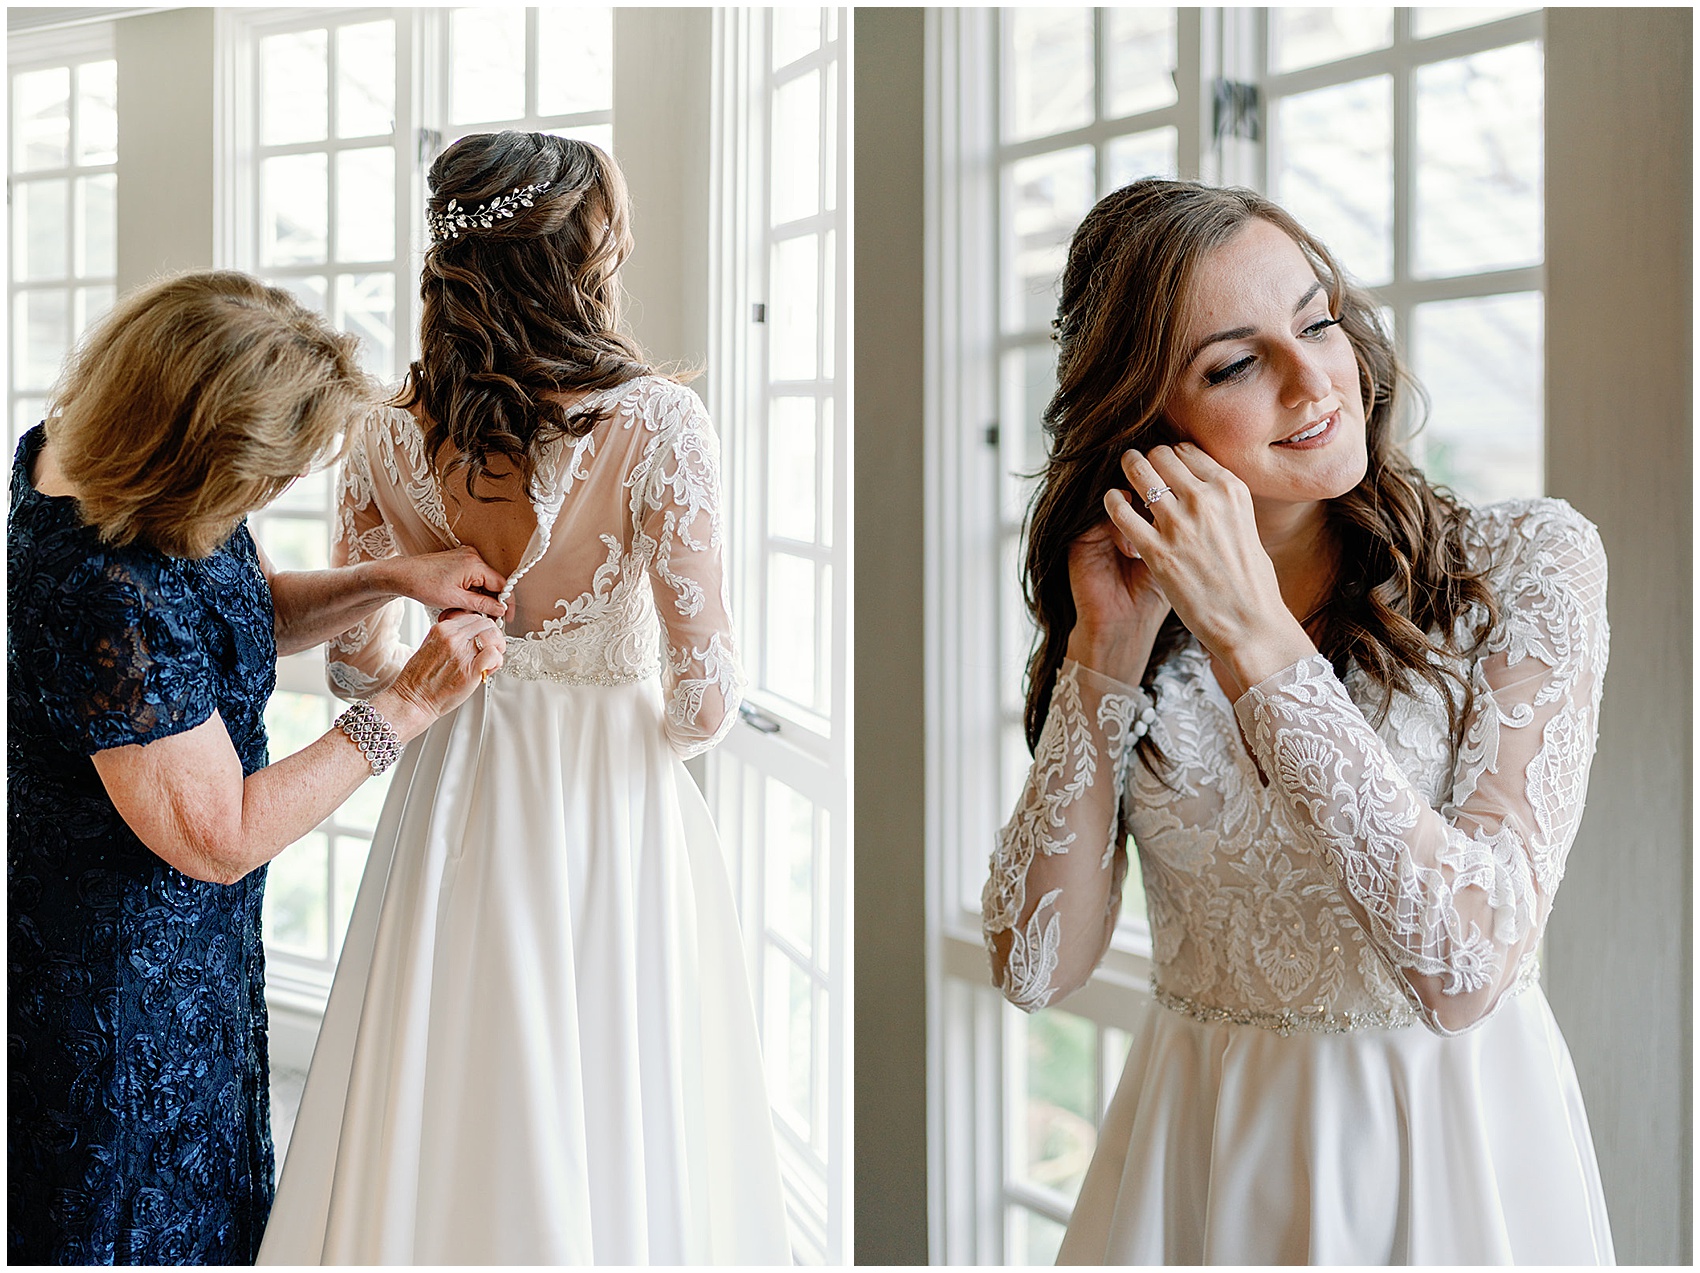 A bride finishes getting ready with mom in a room with tall windows